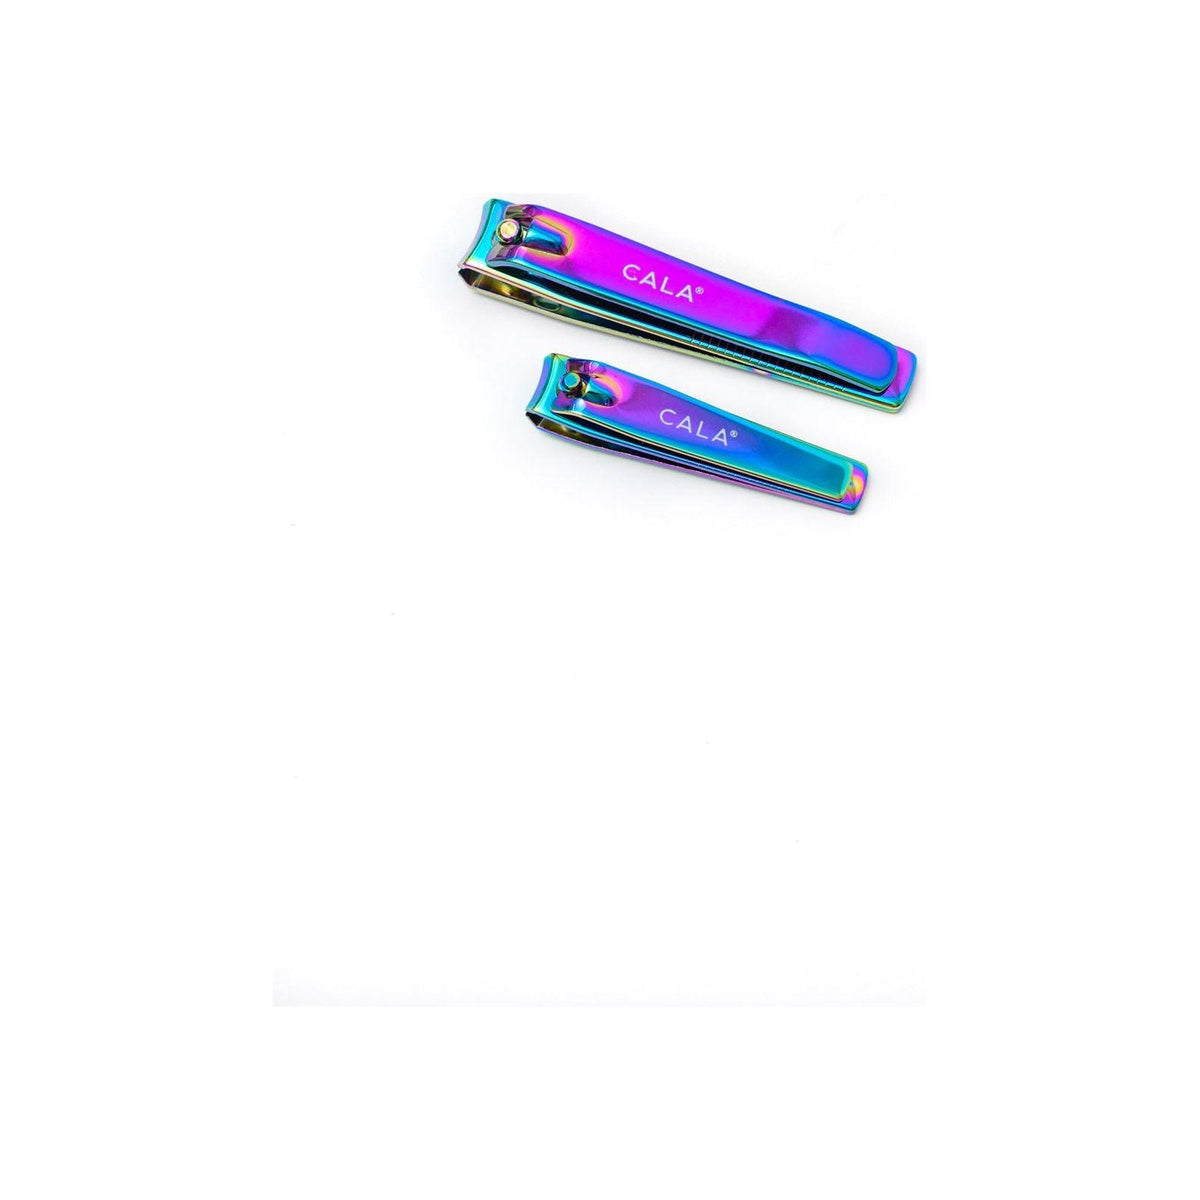 Psychedelic Nail Clippers - becauseofadi